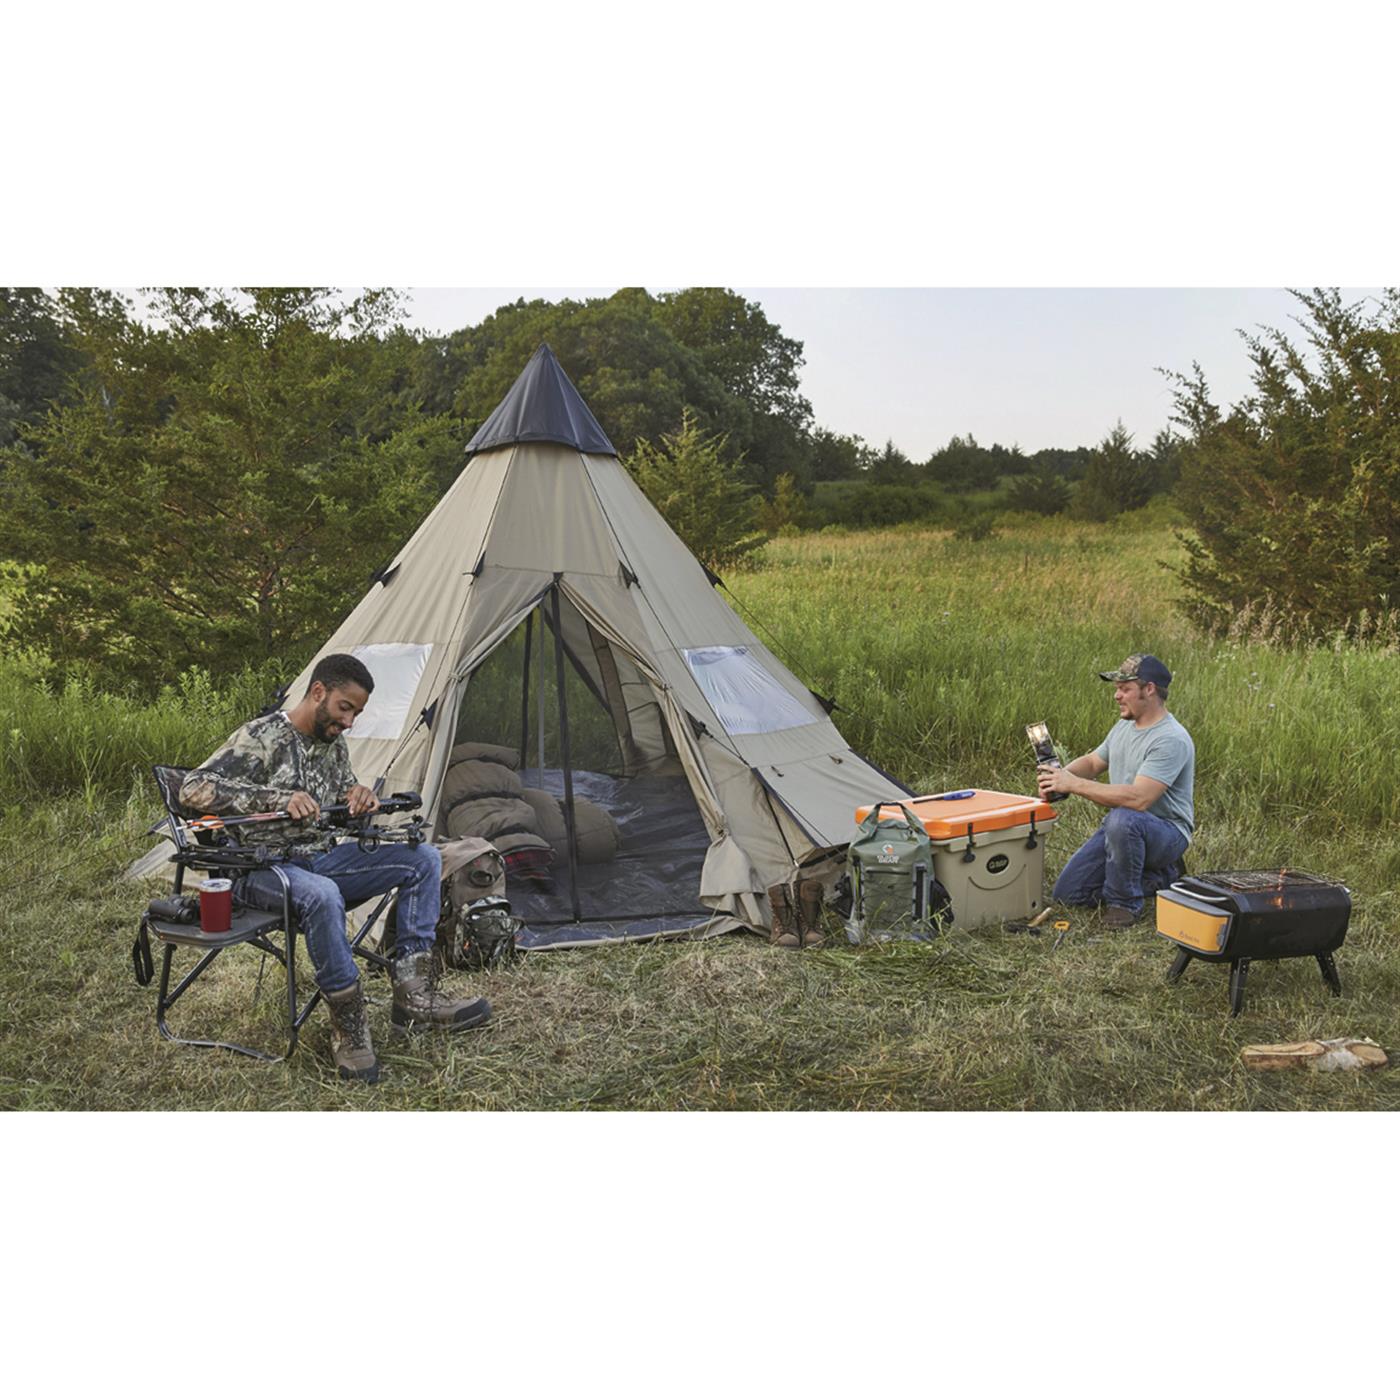 Guide Gear Camping Teepee Tent for Adults, Outdoor, Waterproof, Family, 6 Person, 14' x 14' - image 5 of 12